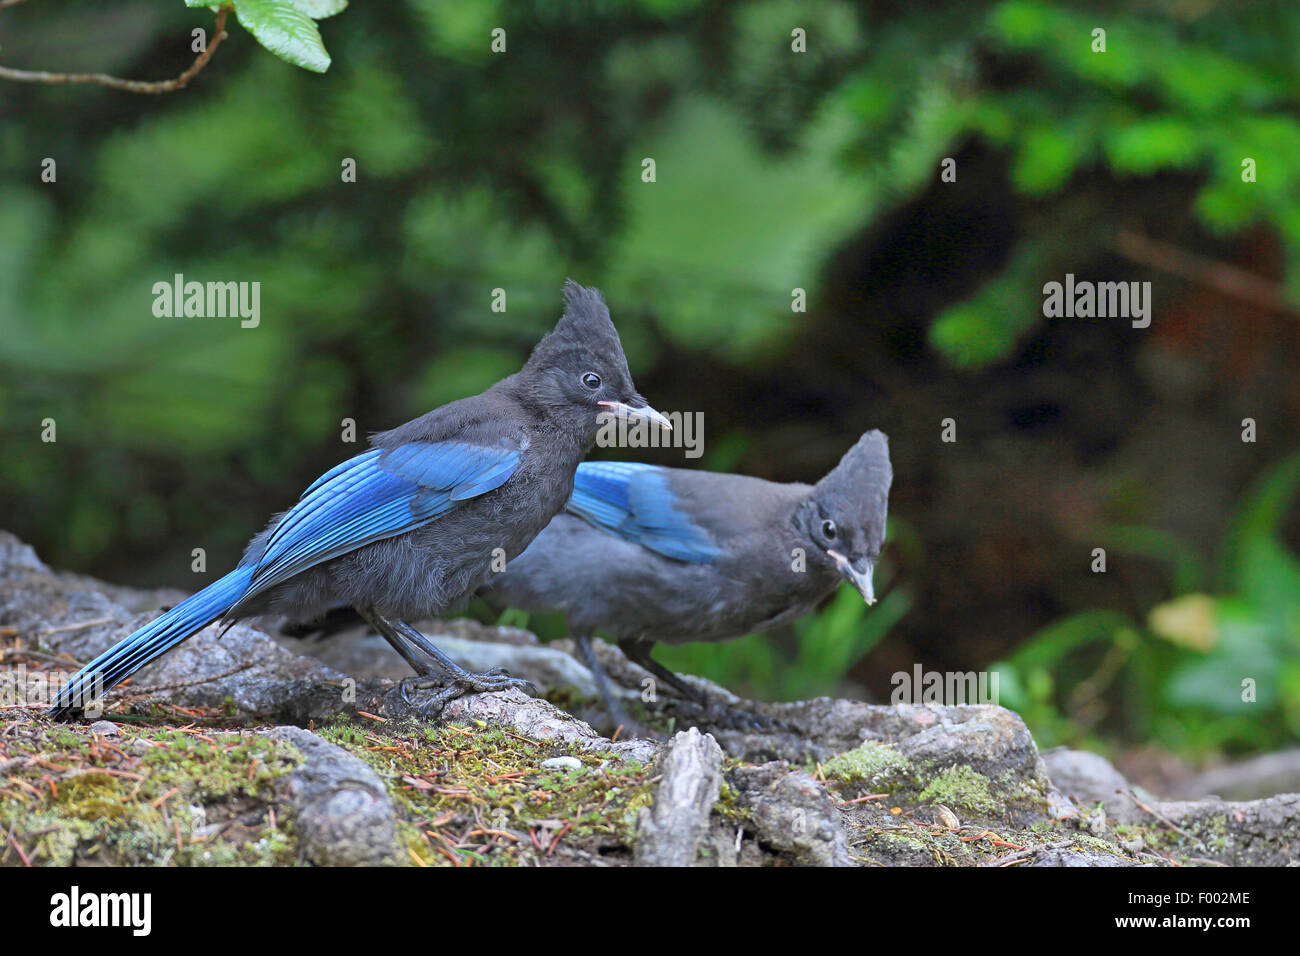 Steller's jay (Cyanocitta stelleri), two jays sitting on the ground and searching food, Canada, Glacier Natioanl Park Stock Photo